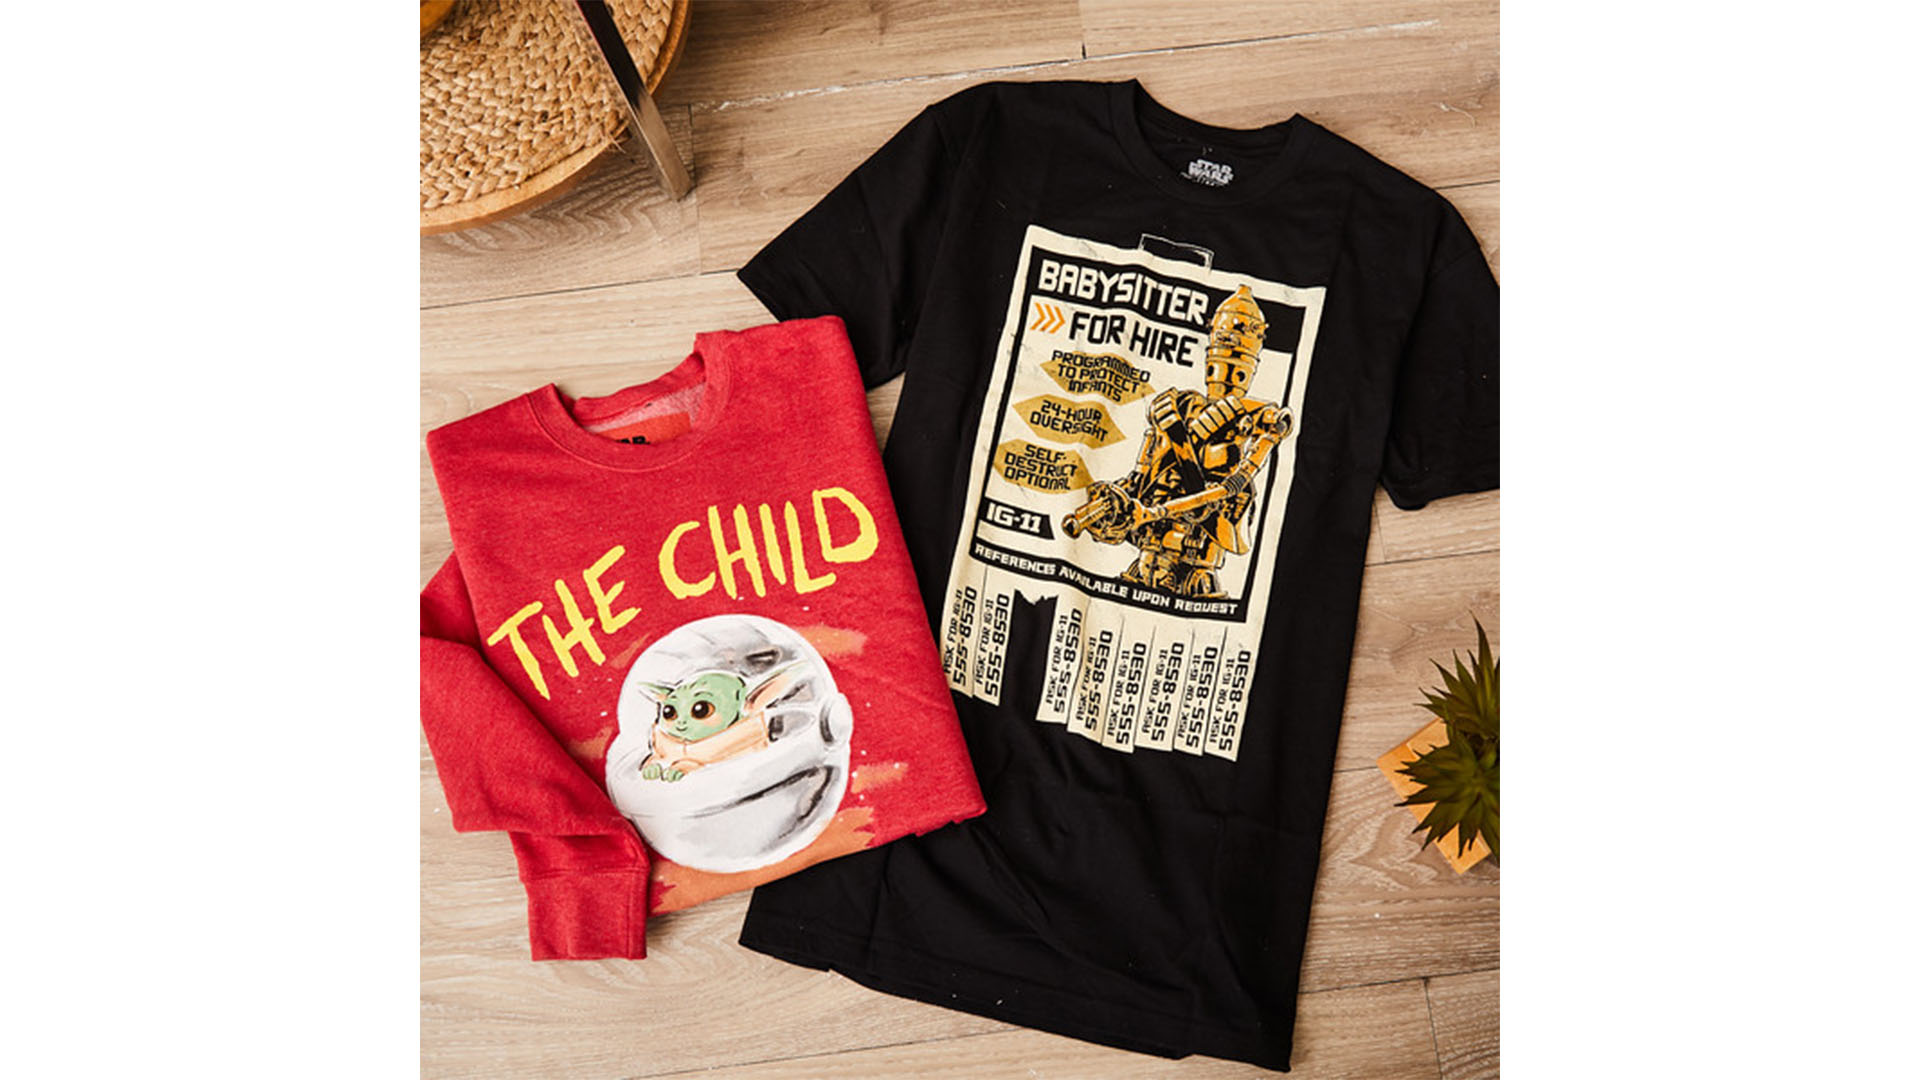 A folded red t-shirt featuring The Child and a black t-shirt featuring IG-11 from Star Wars: The Mandalorian.